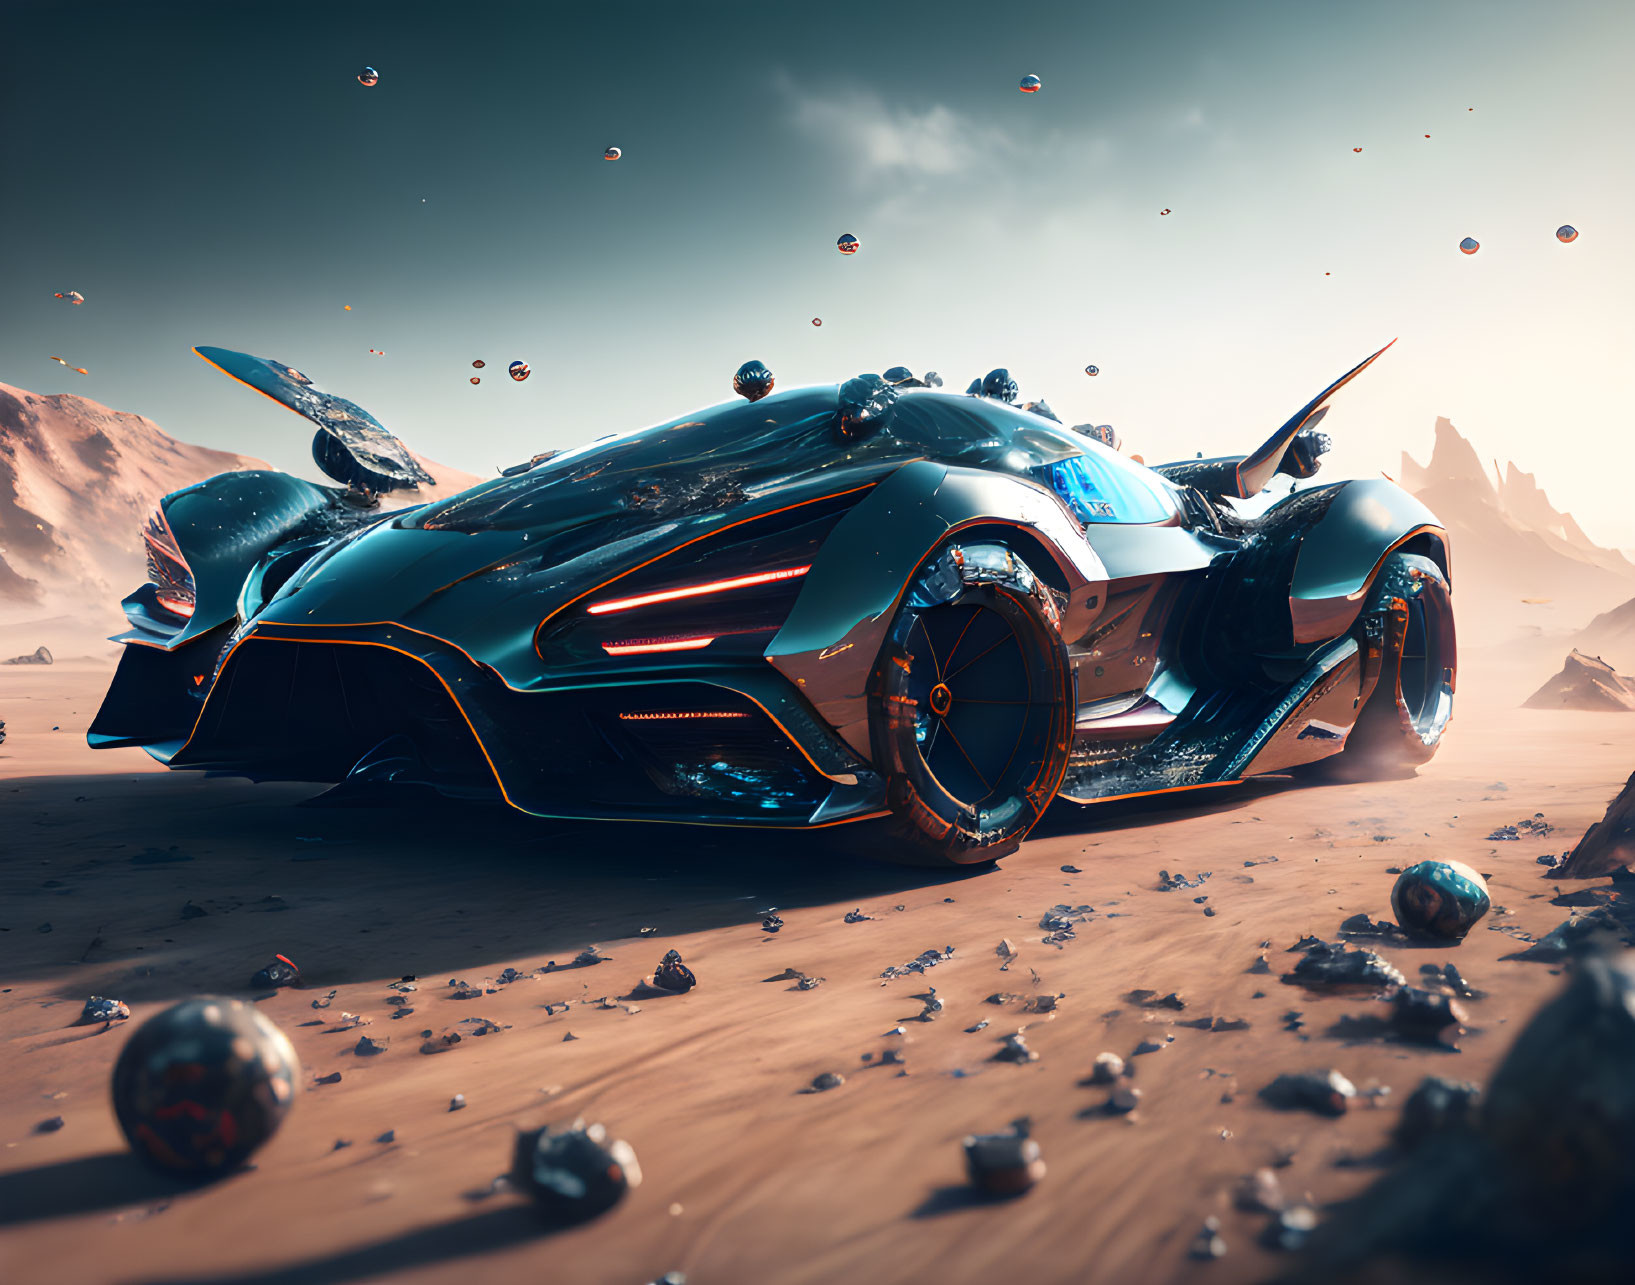 Futuristic sports car on alien planet with gull-wing doors